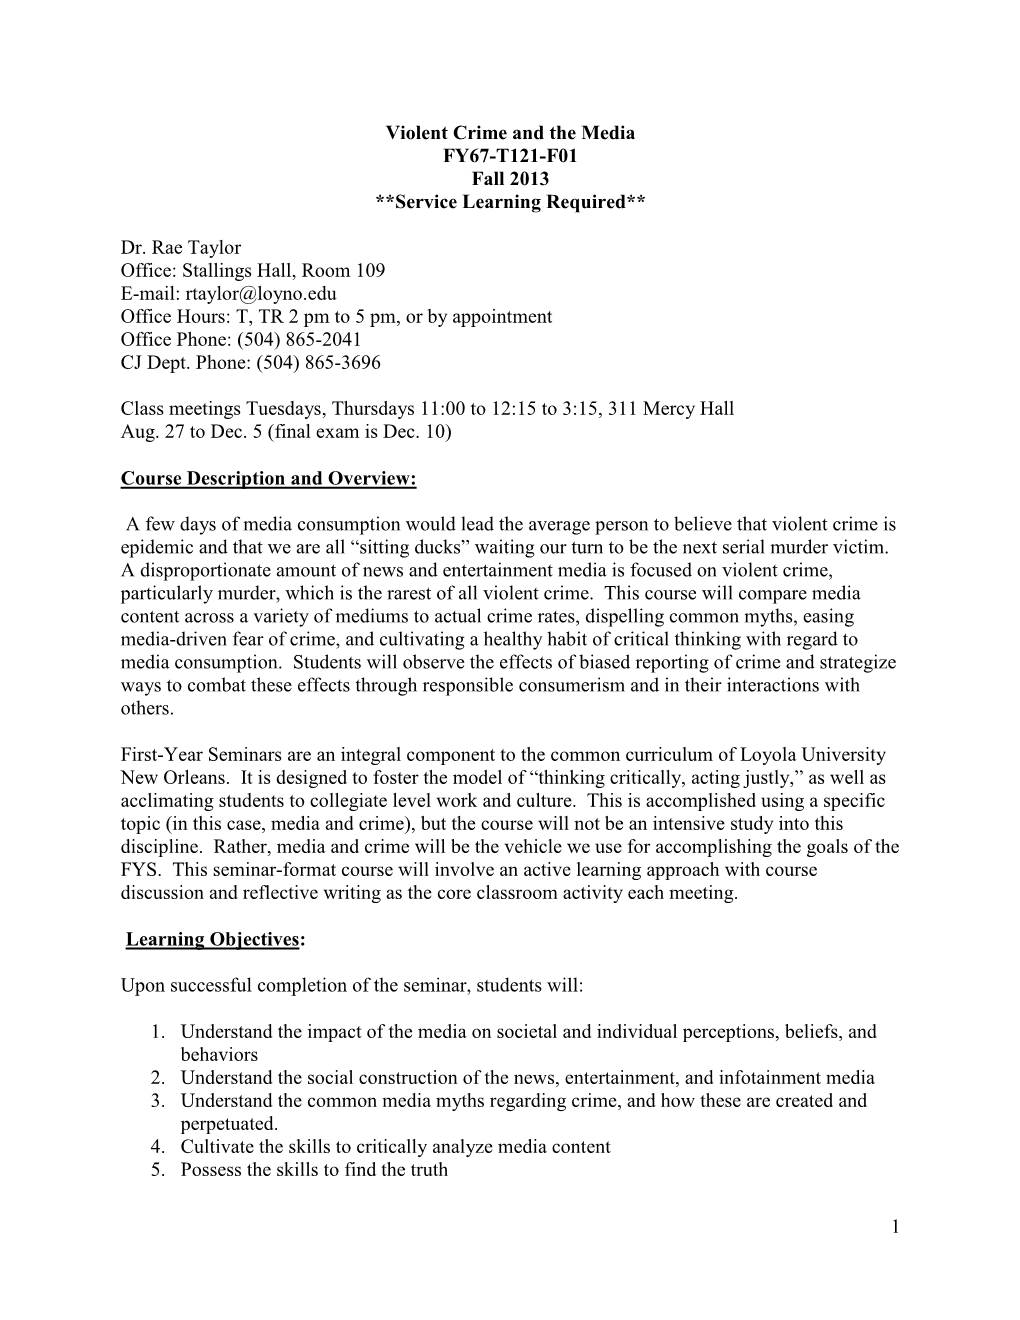 Violent Crime and the Media FY67-T121-F01 Fall 2013 **Service Learning Required**